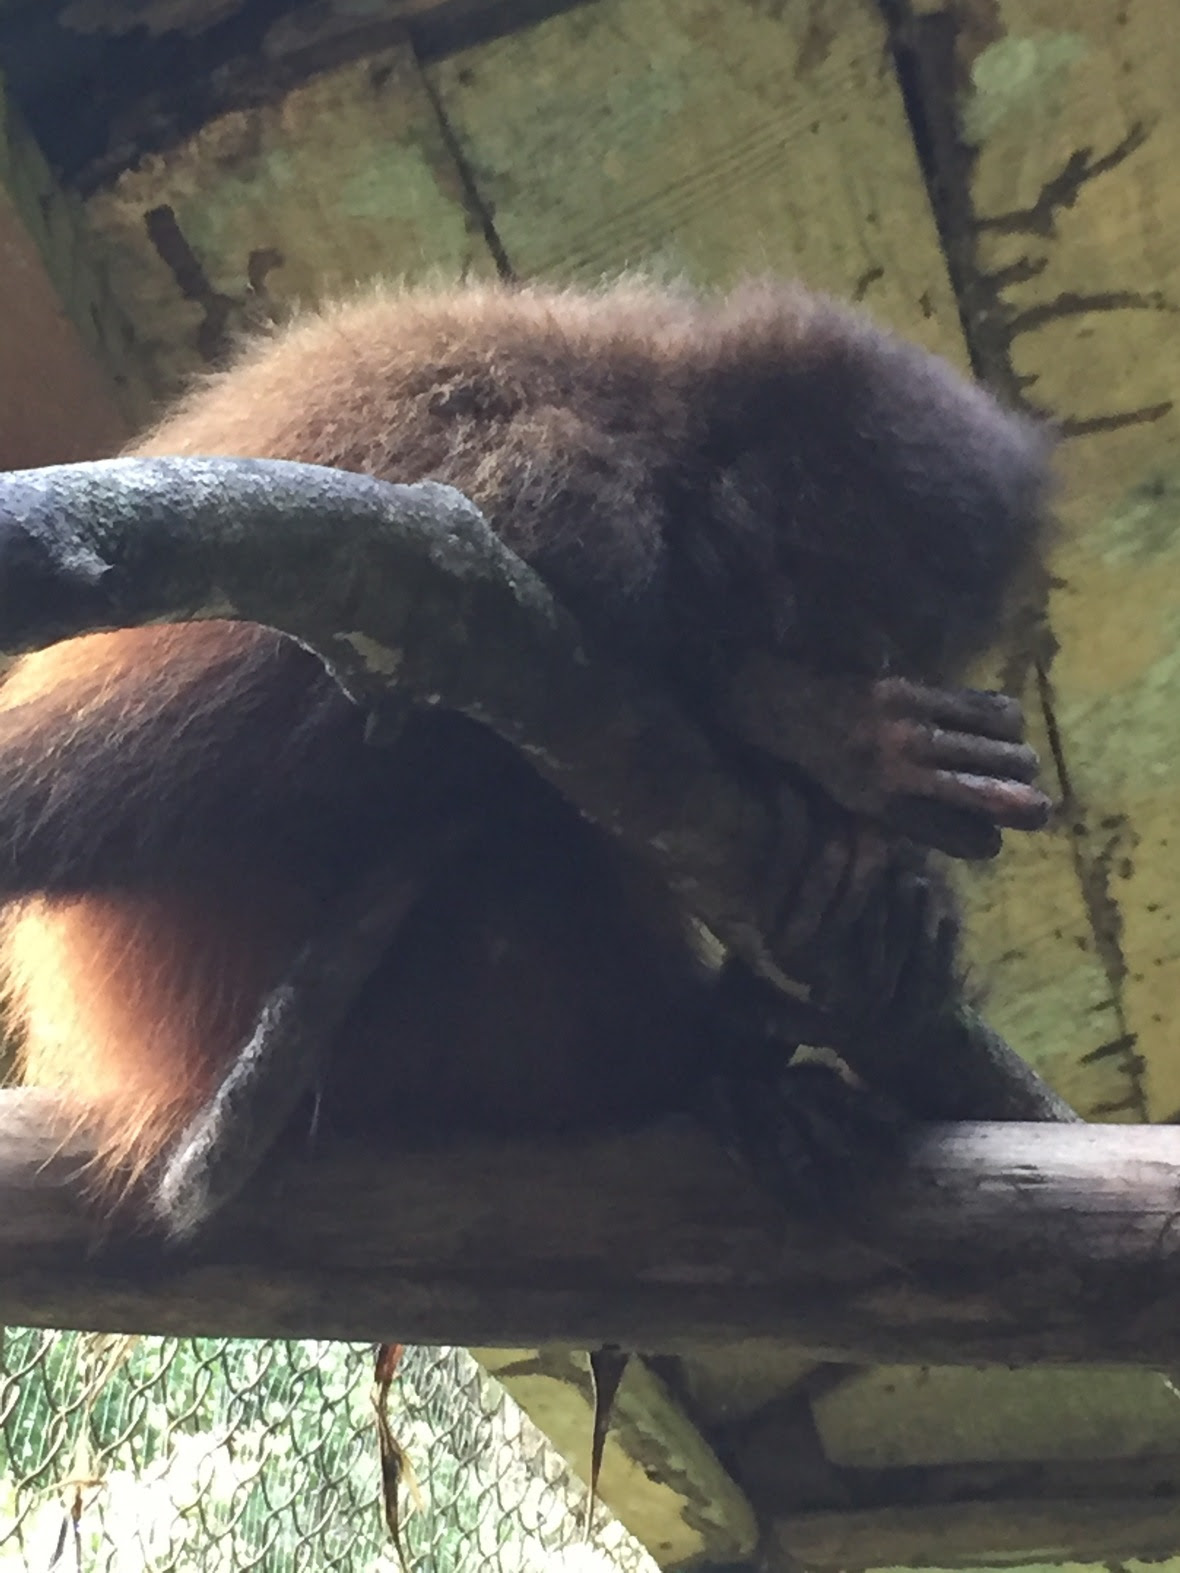 Spider monkey curled up